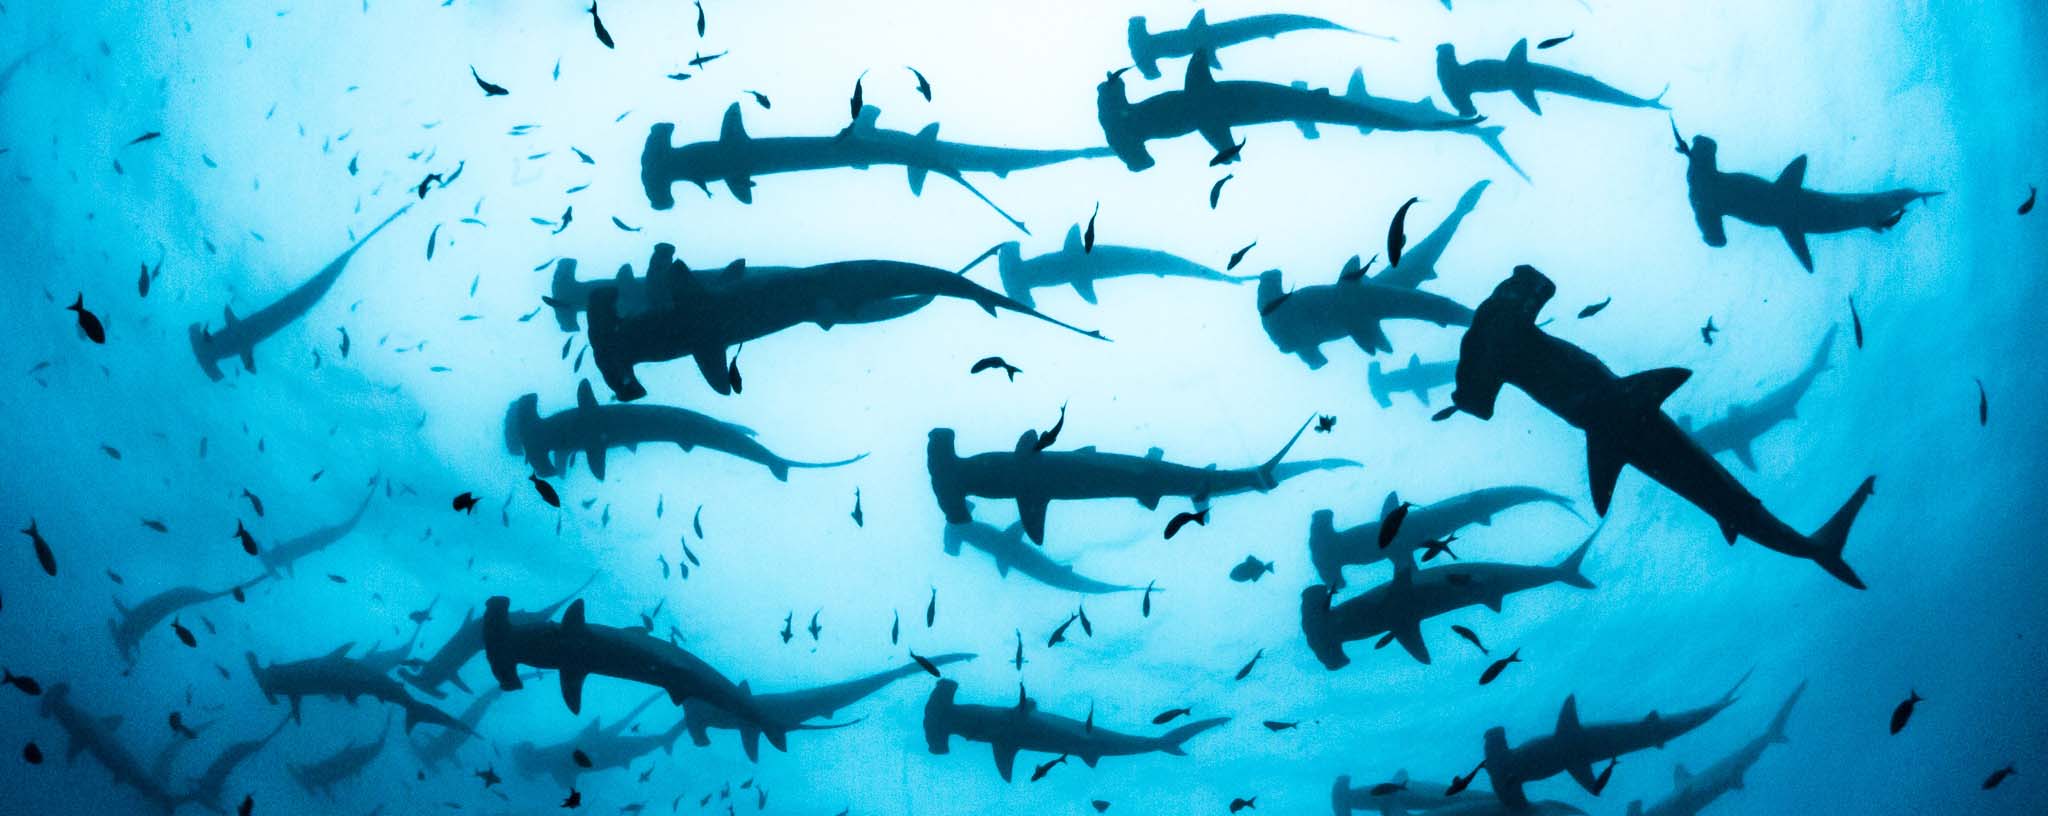 Galapagos Hammerhead Sharks schooling underwater photography by Dr Simon Pierce